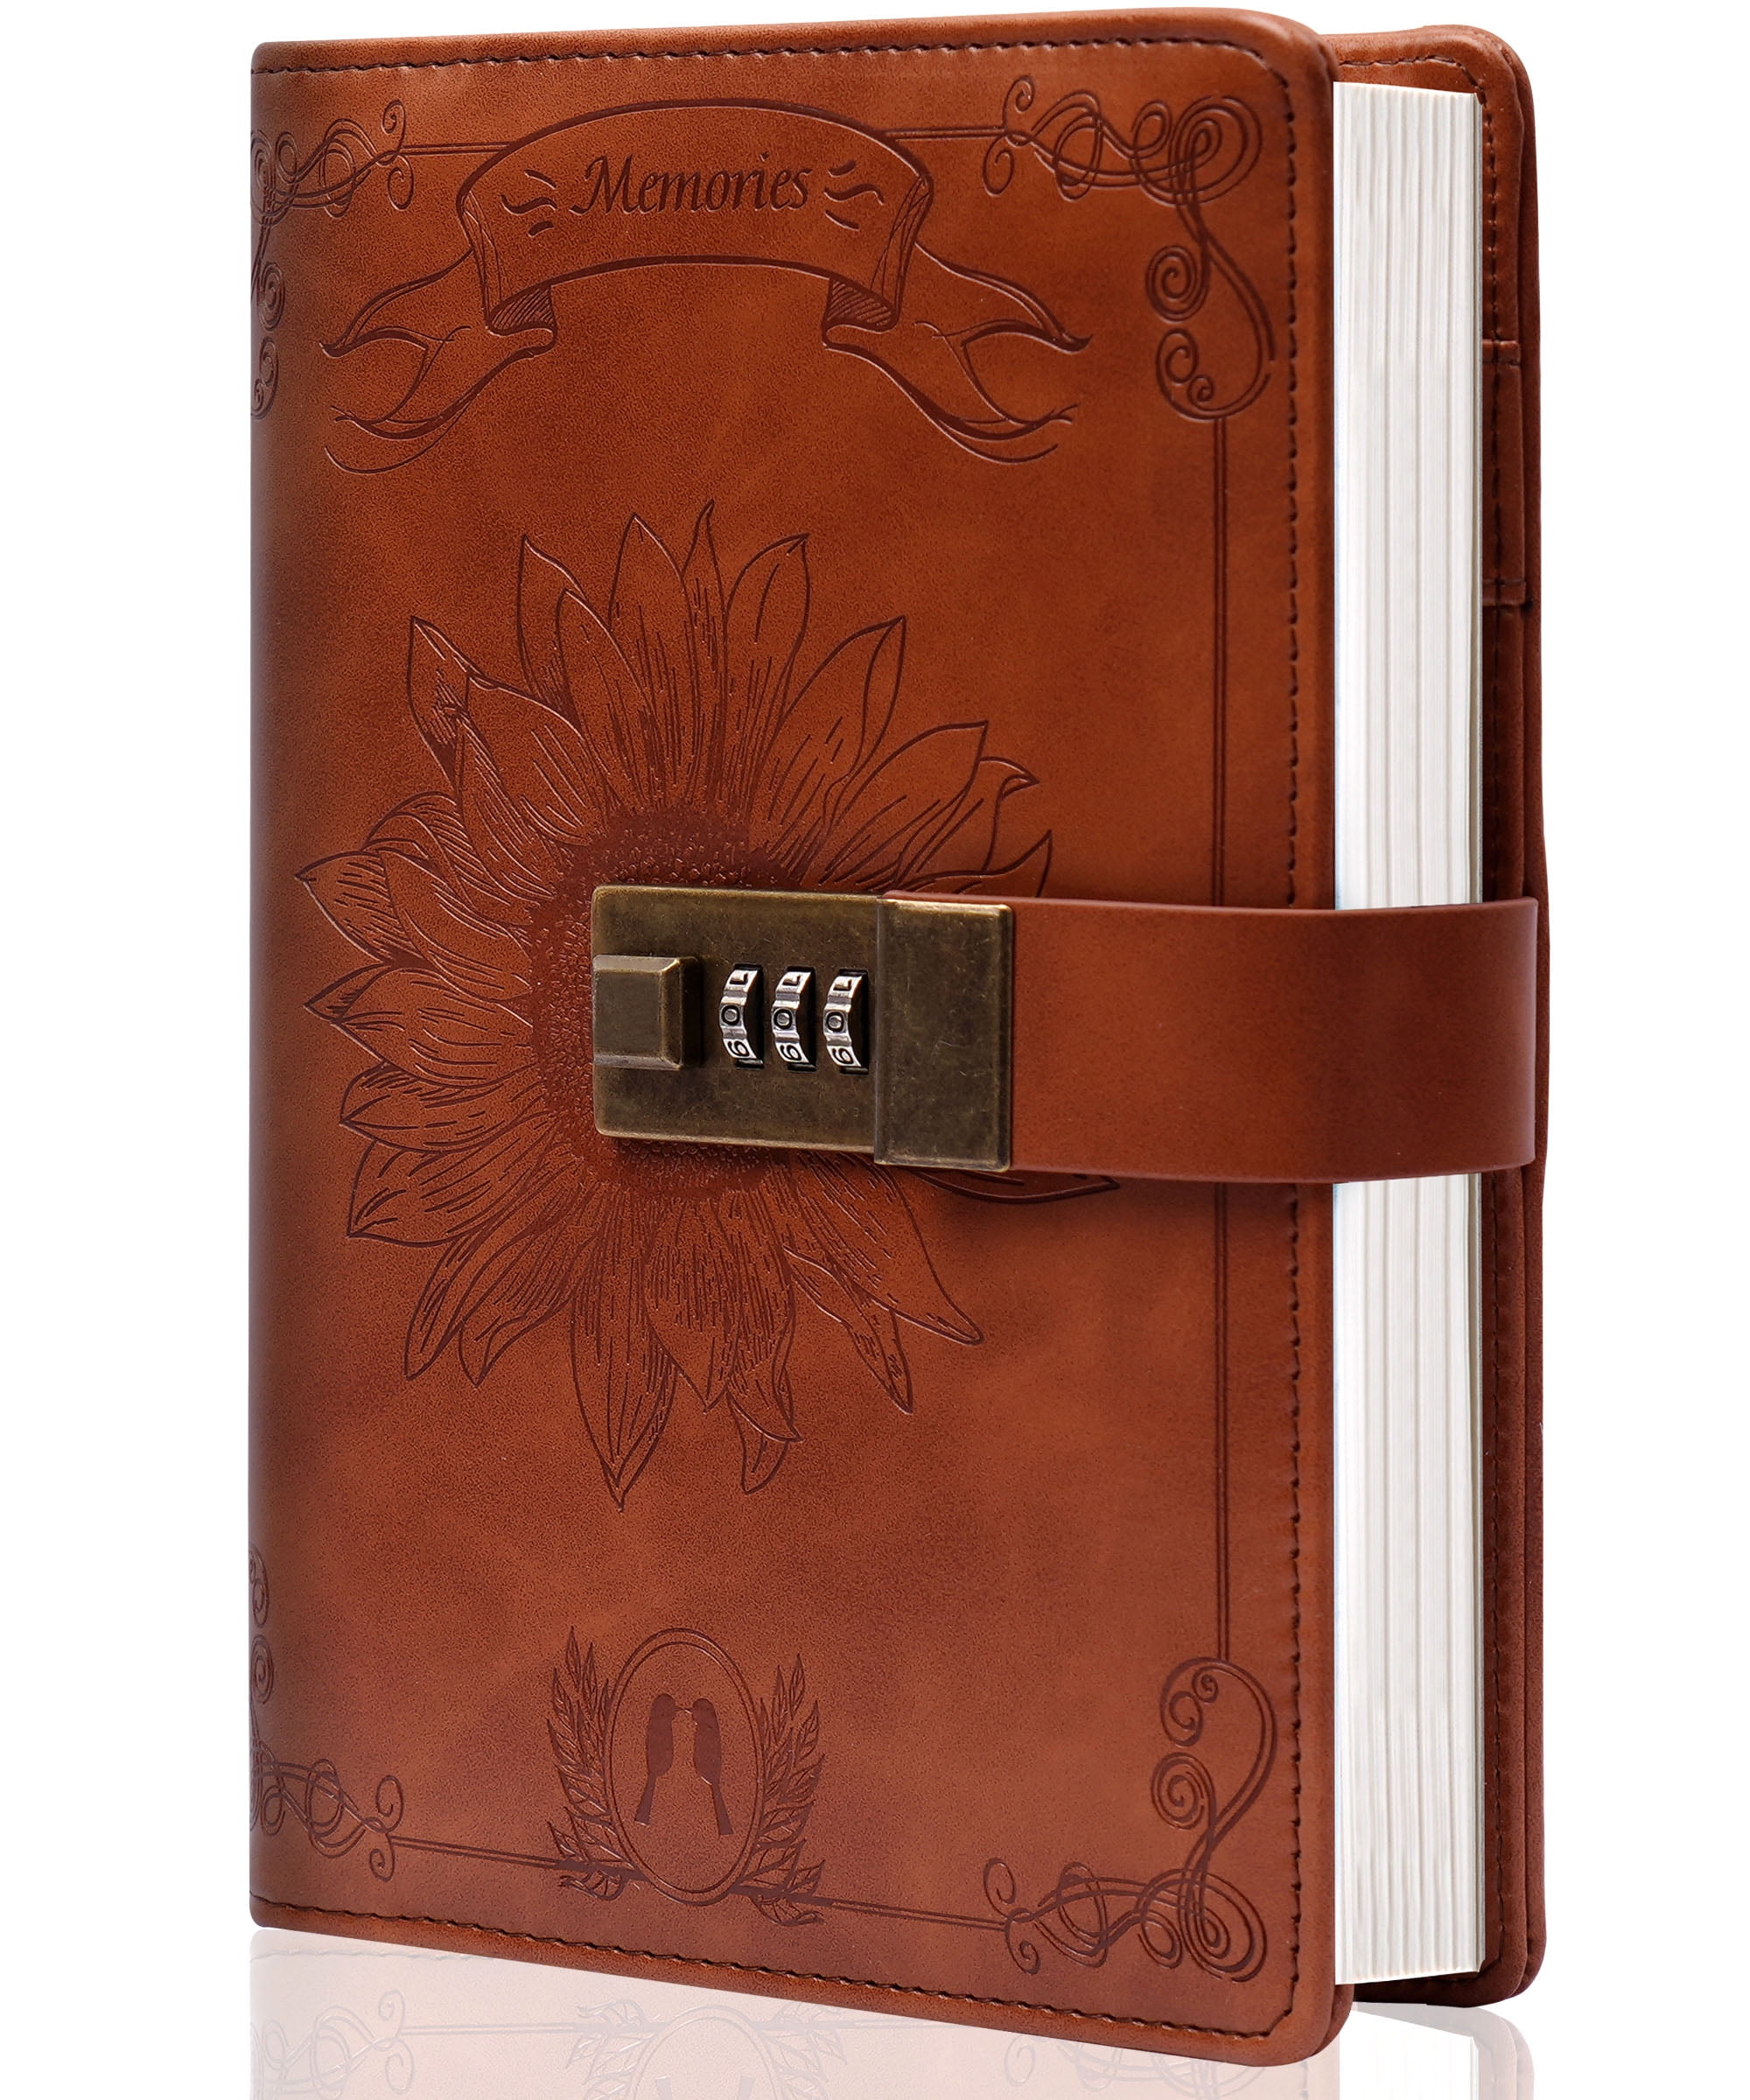 Sunflower Pink Lock Diary for Women Vintage Lock Journal Refillable Personal Locking Diary Leather Locking Journal Writing Notebook Girls B6 Secret Journal with Combination Passwords 5.5 x 7.8 in 